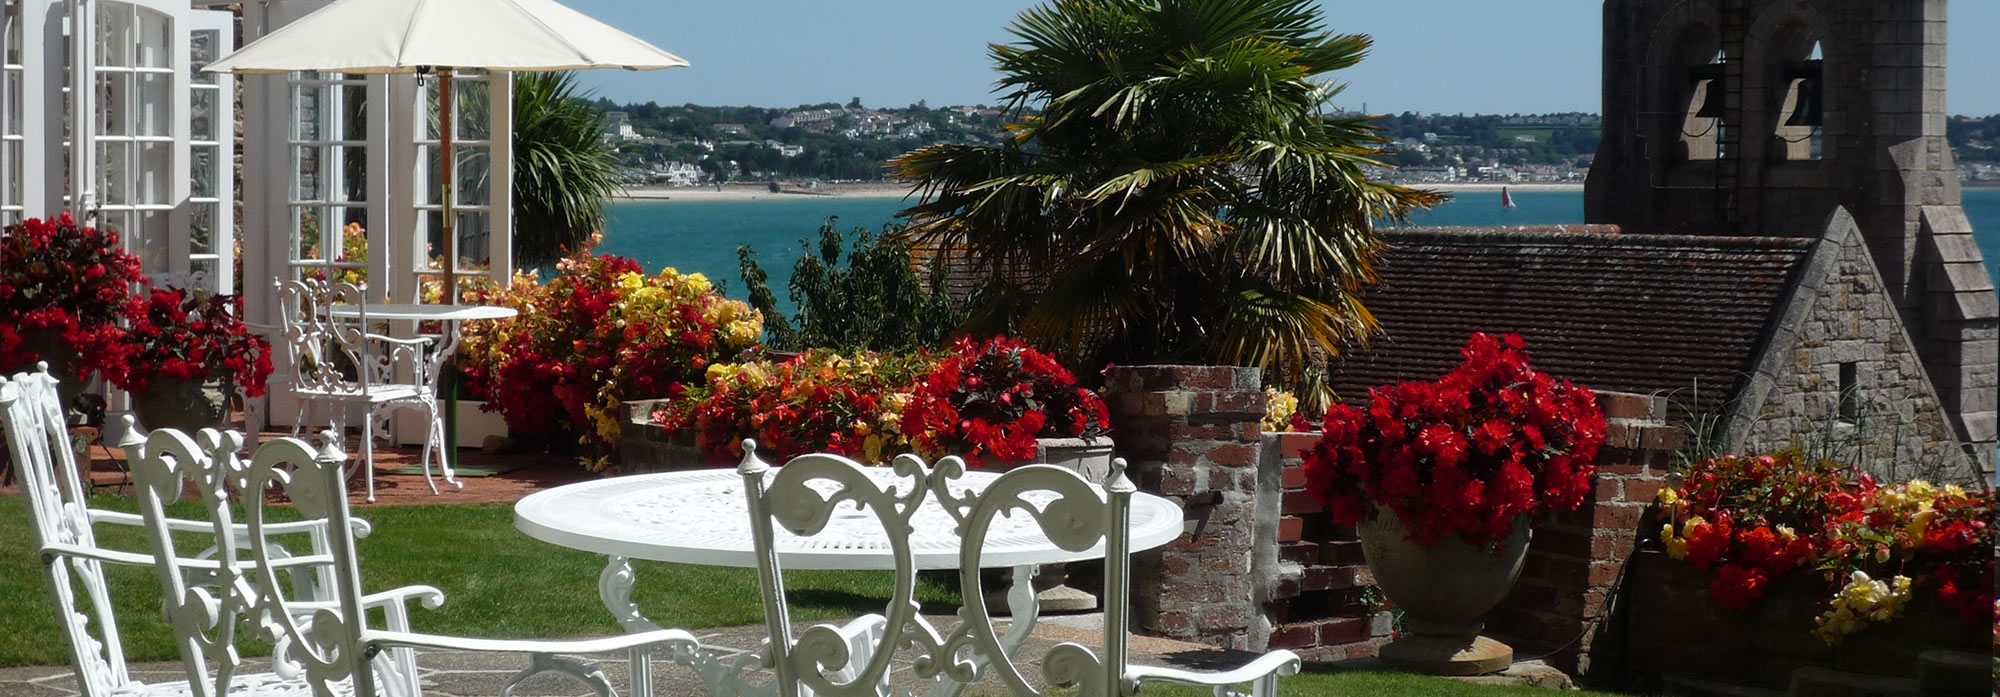 The Panorama Guest House, Jersey